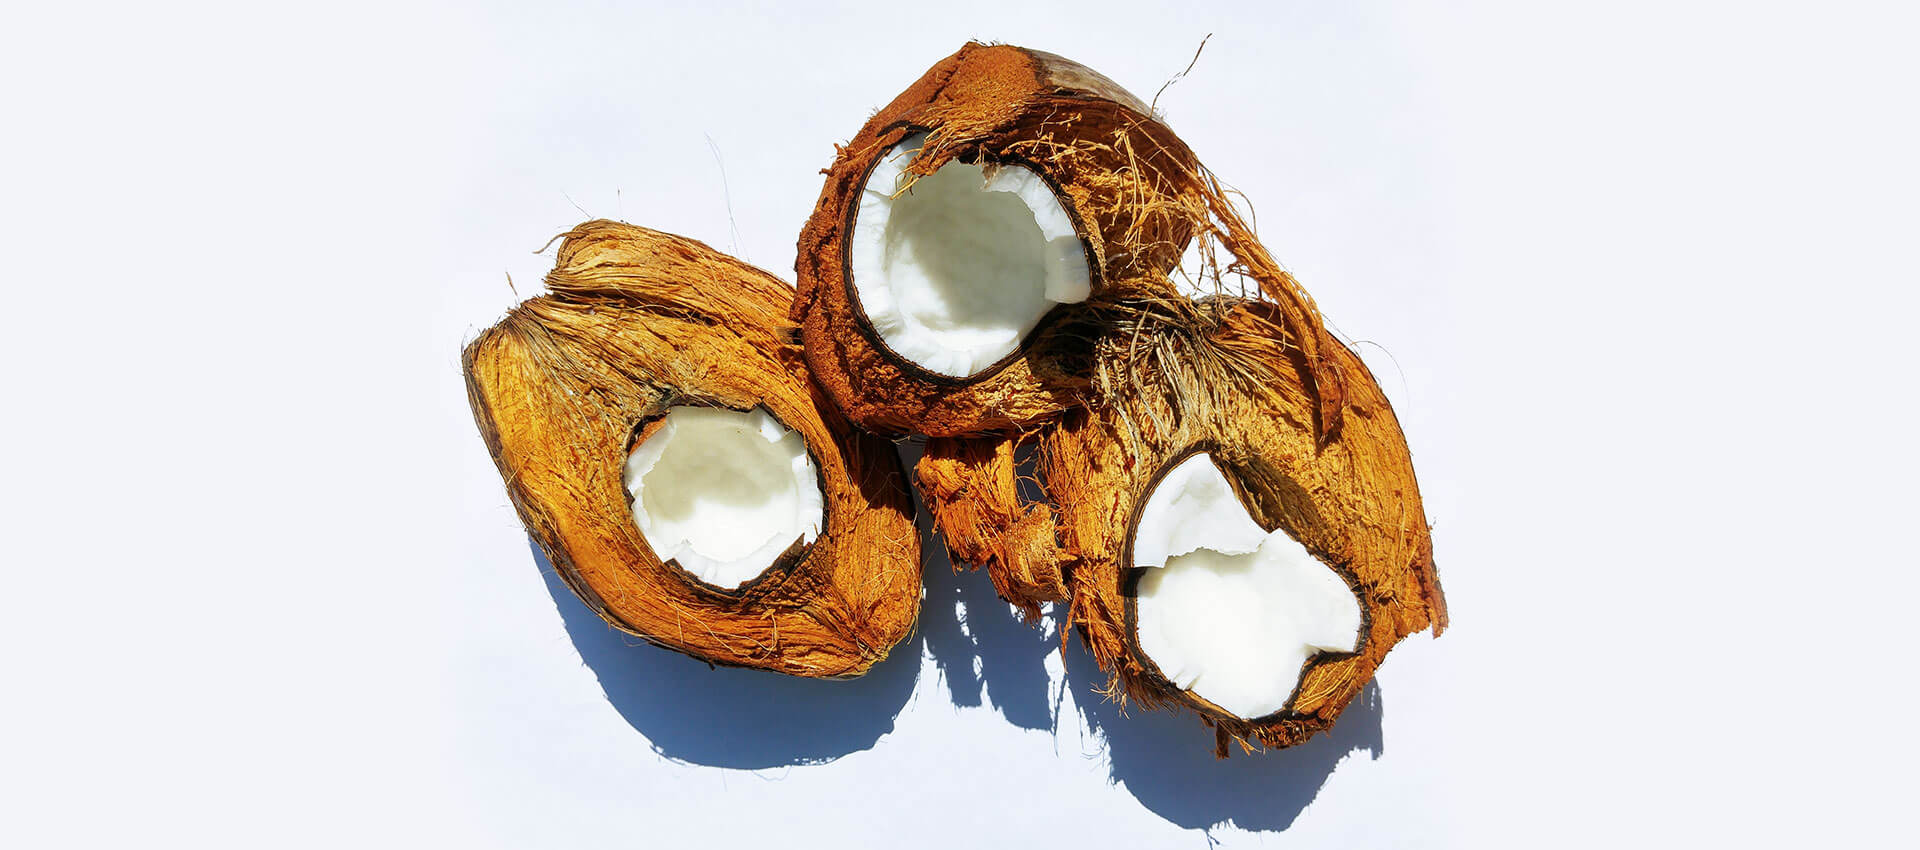 How to make virgin, cold-pressed coconut oil